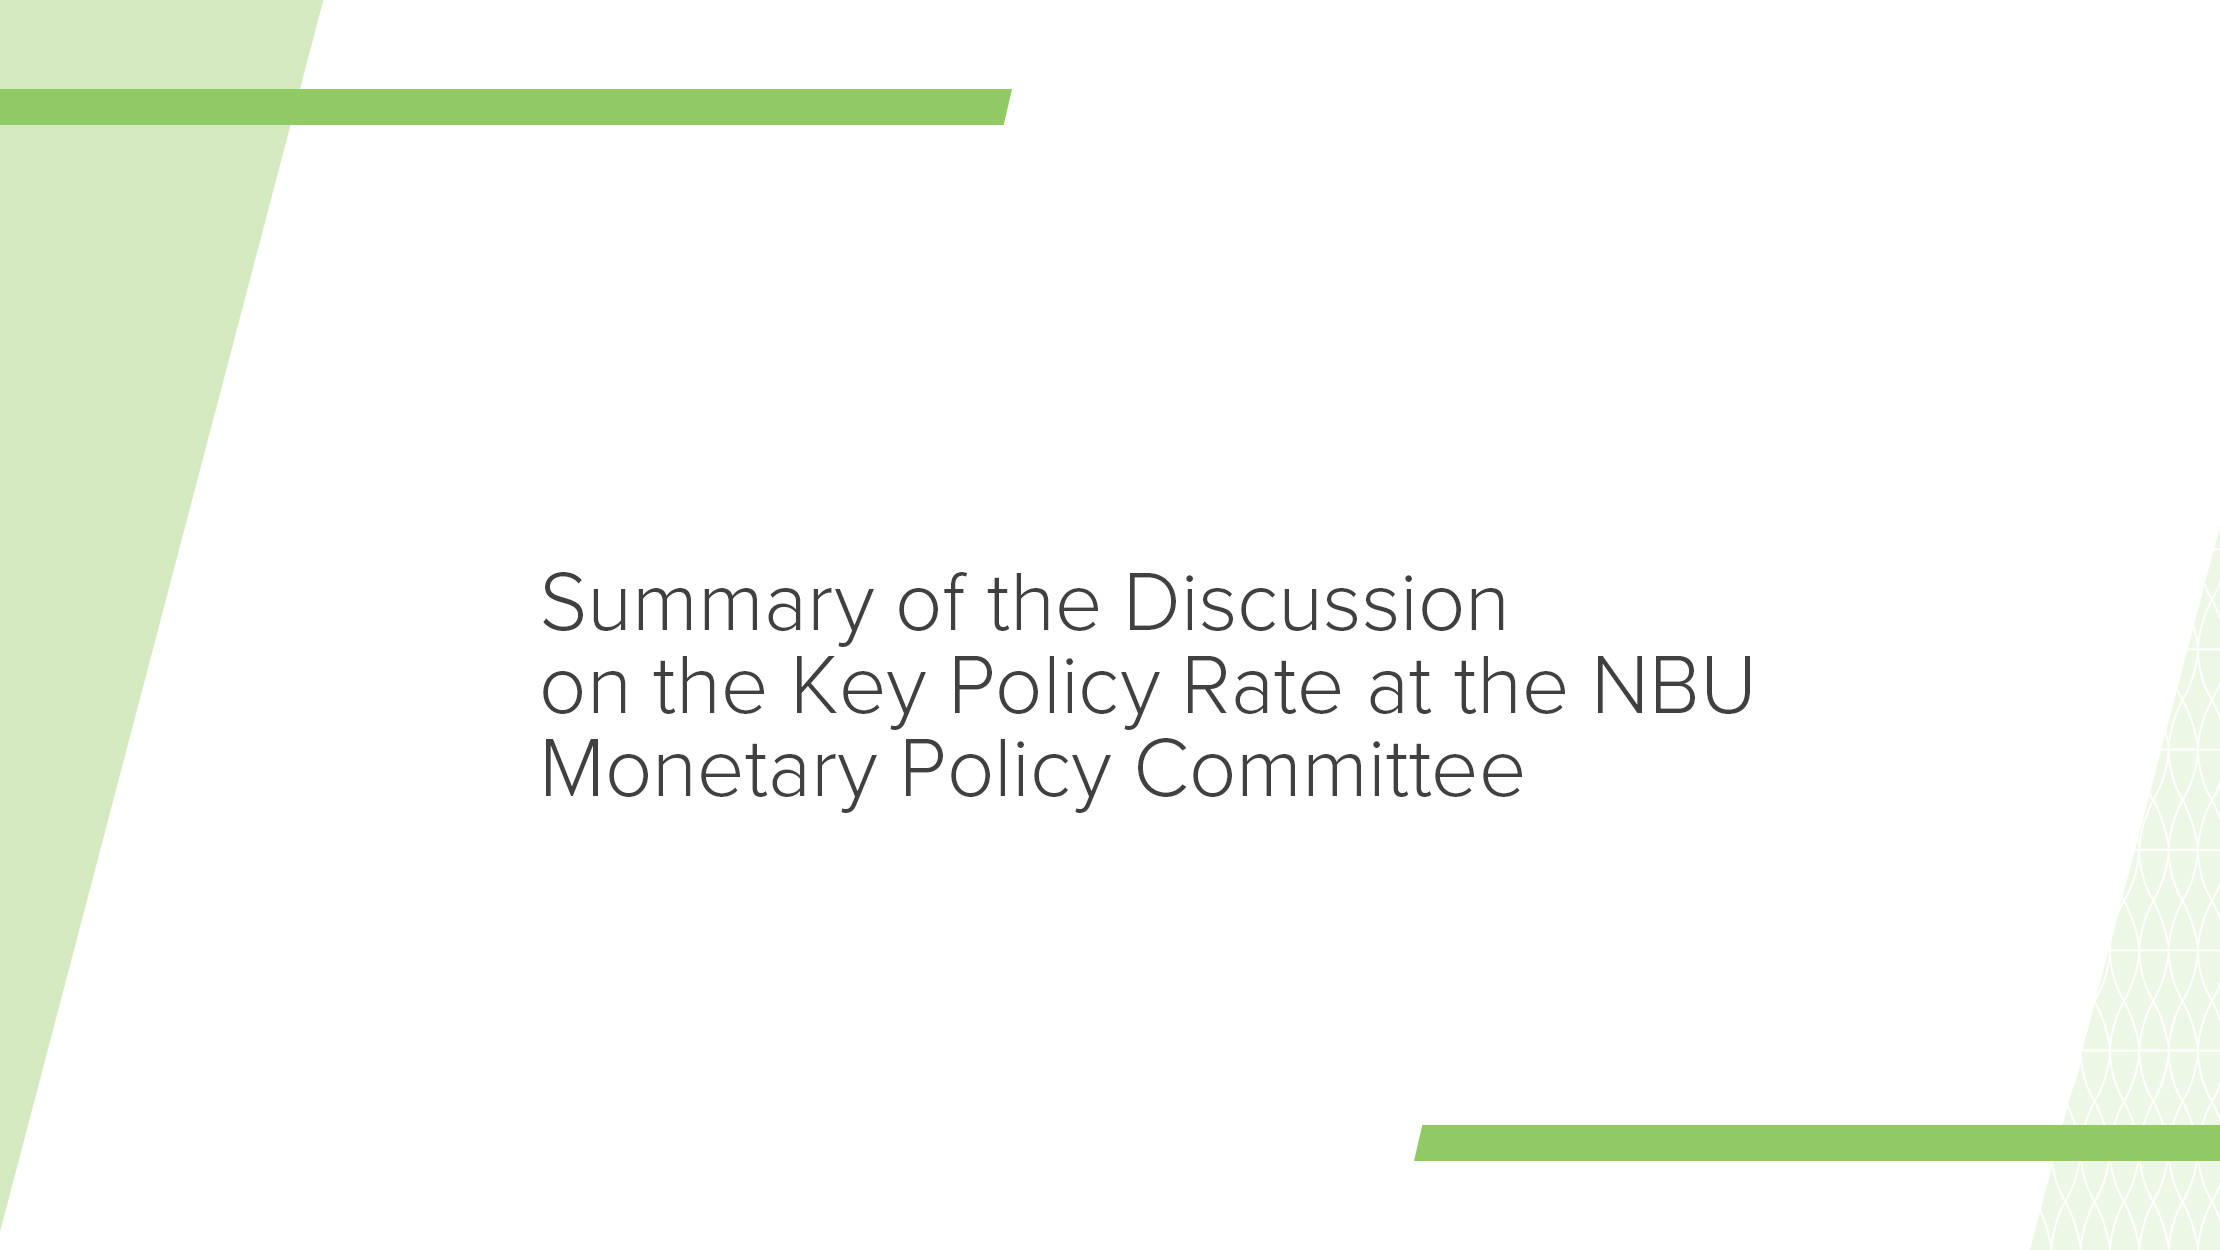 Summary of the Key Policy Rate Discussion by the NBU Monetary Policy Committee 11 December 2019